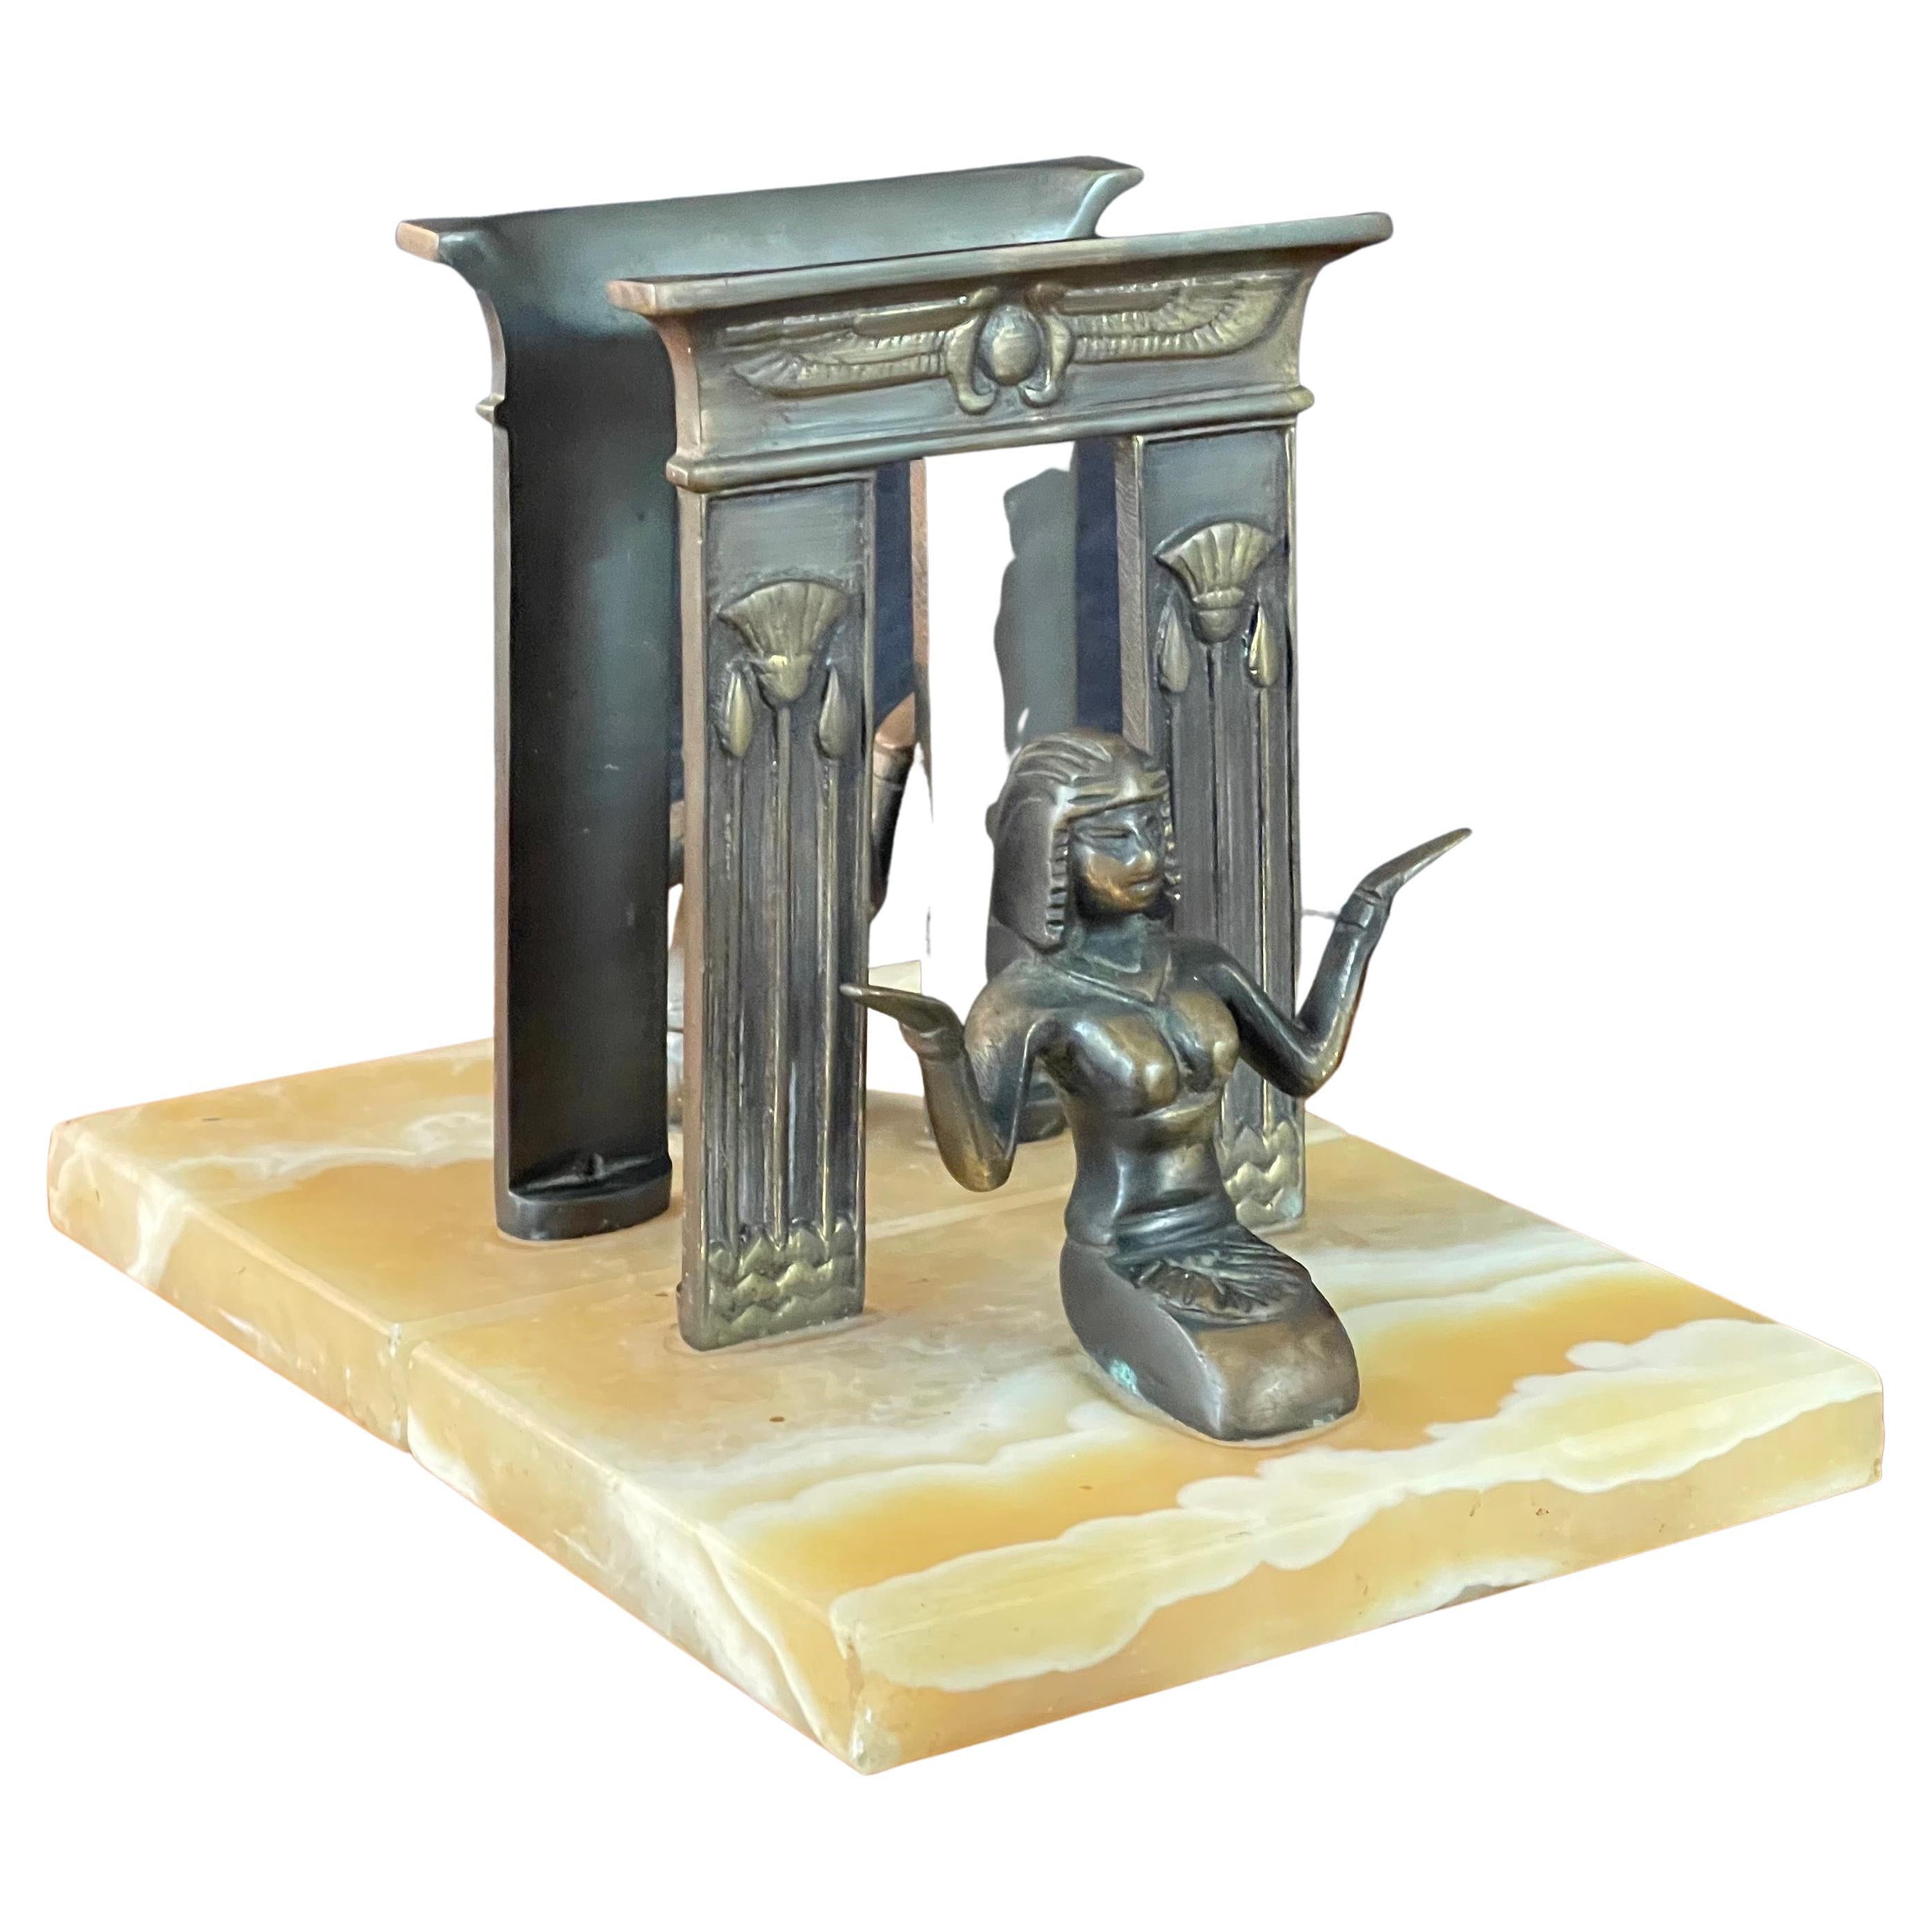 A nice pair of Egyptian revival bronze bookends on marble blocks, circa 1940s. The art deco period set are in good vintage condition and measure 8.25